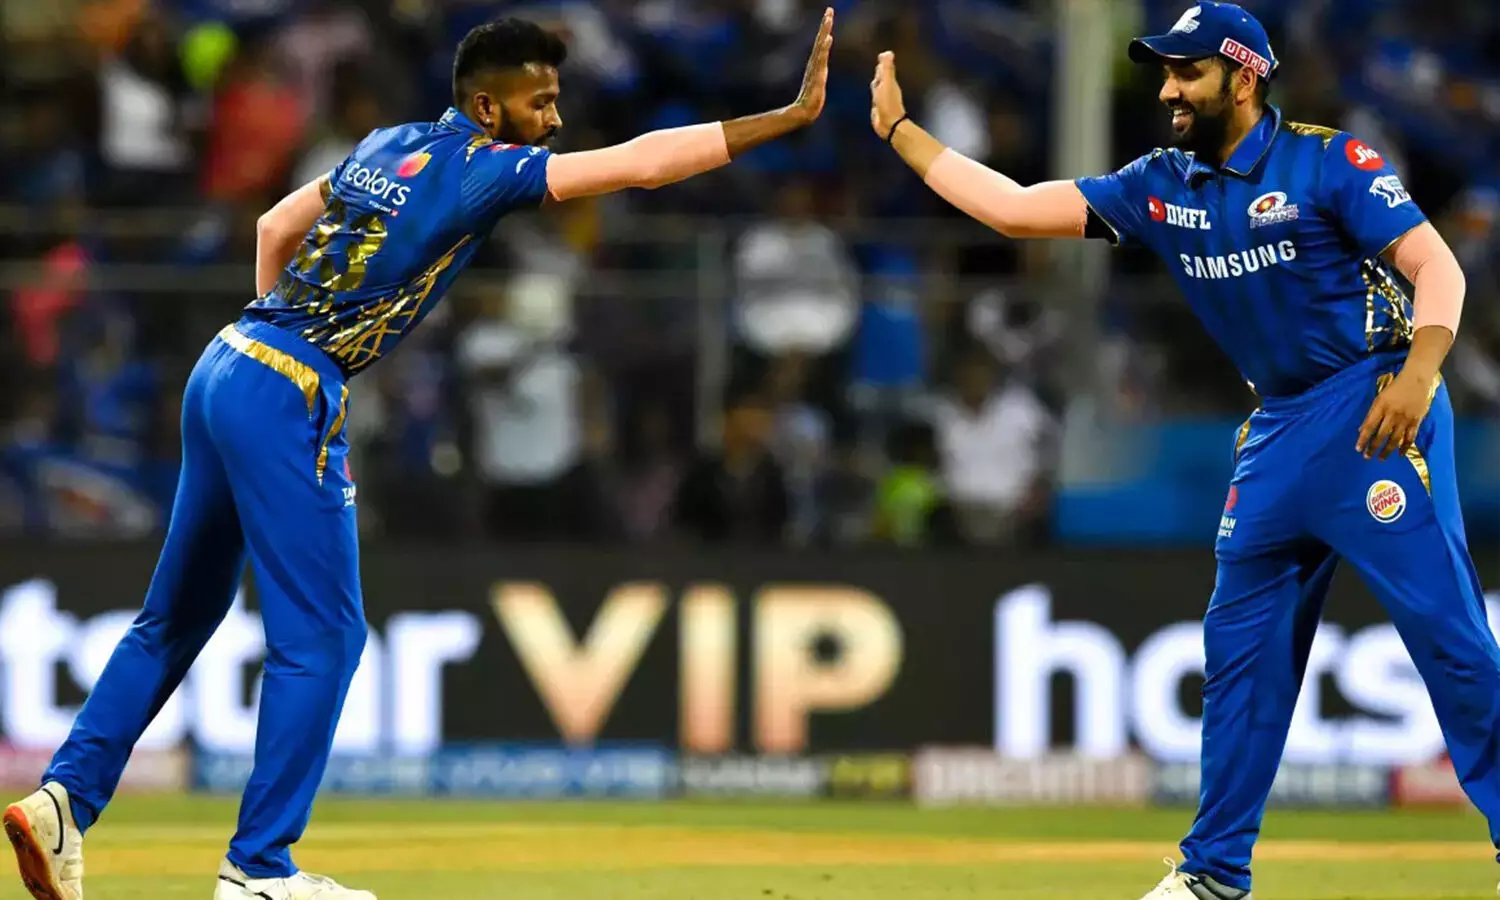 Hardik Pandya Meets Former Captain Rohit Sharma for the First Time After MI Captaincy Change